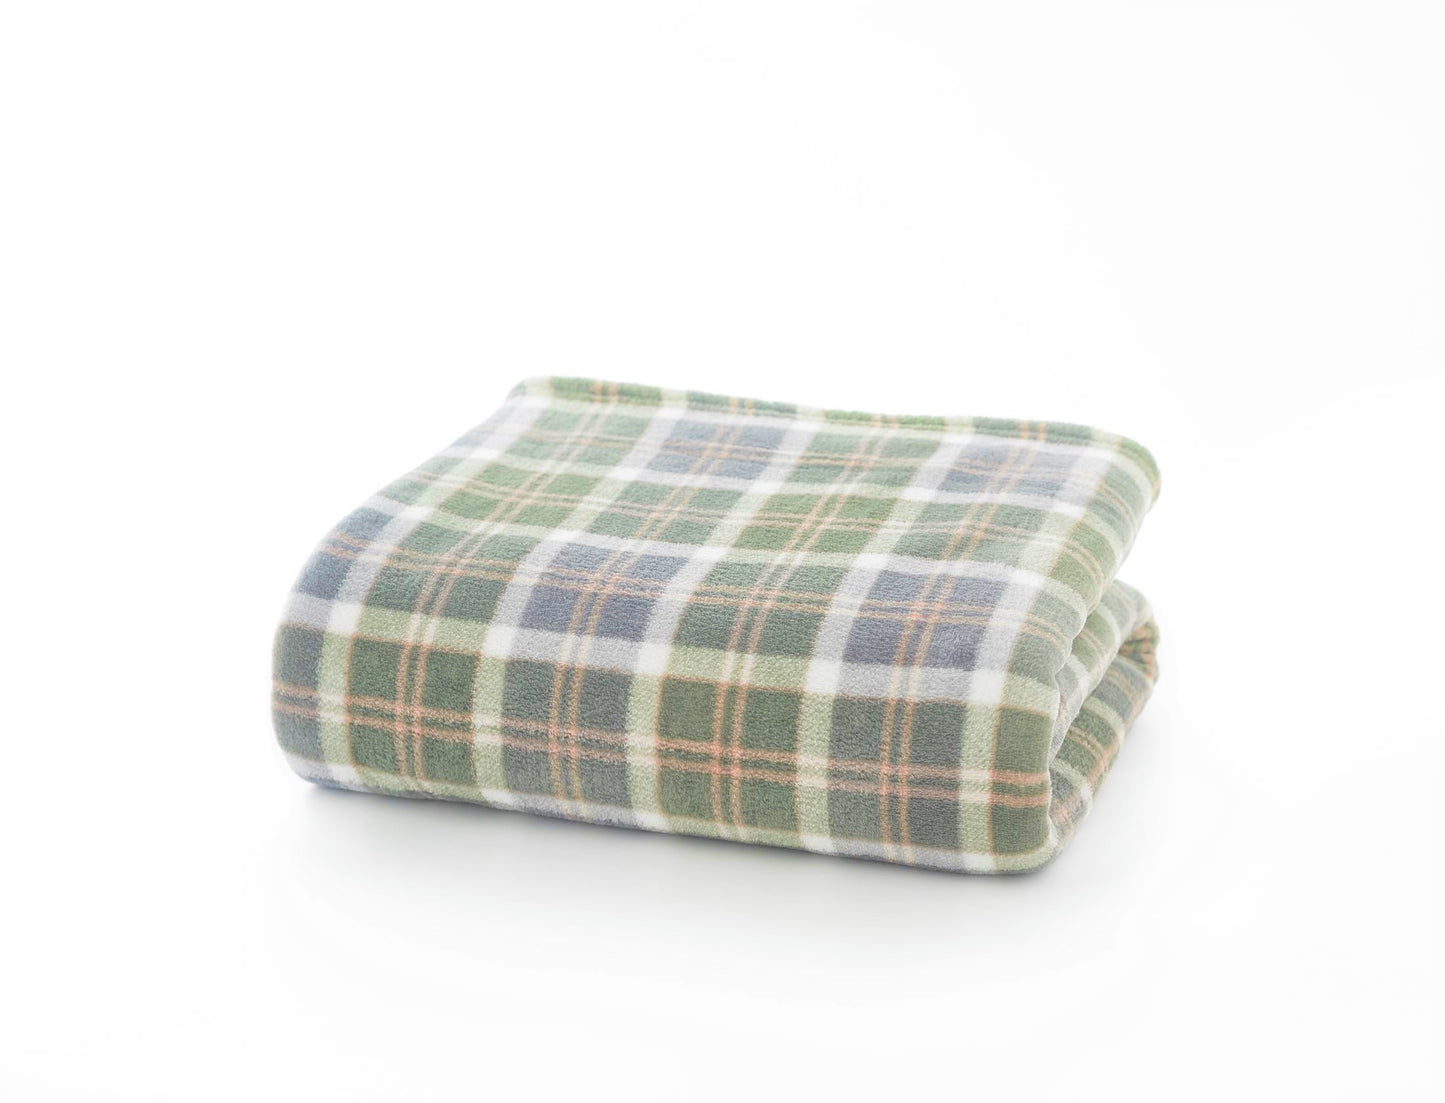 Snuggletouch Check Throw in Olive Green